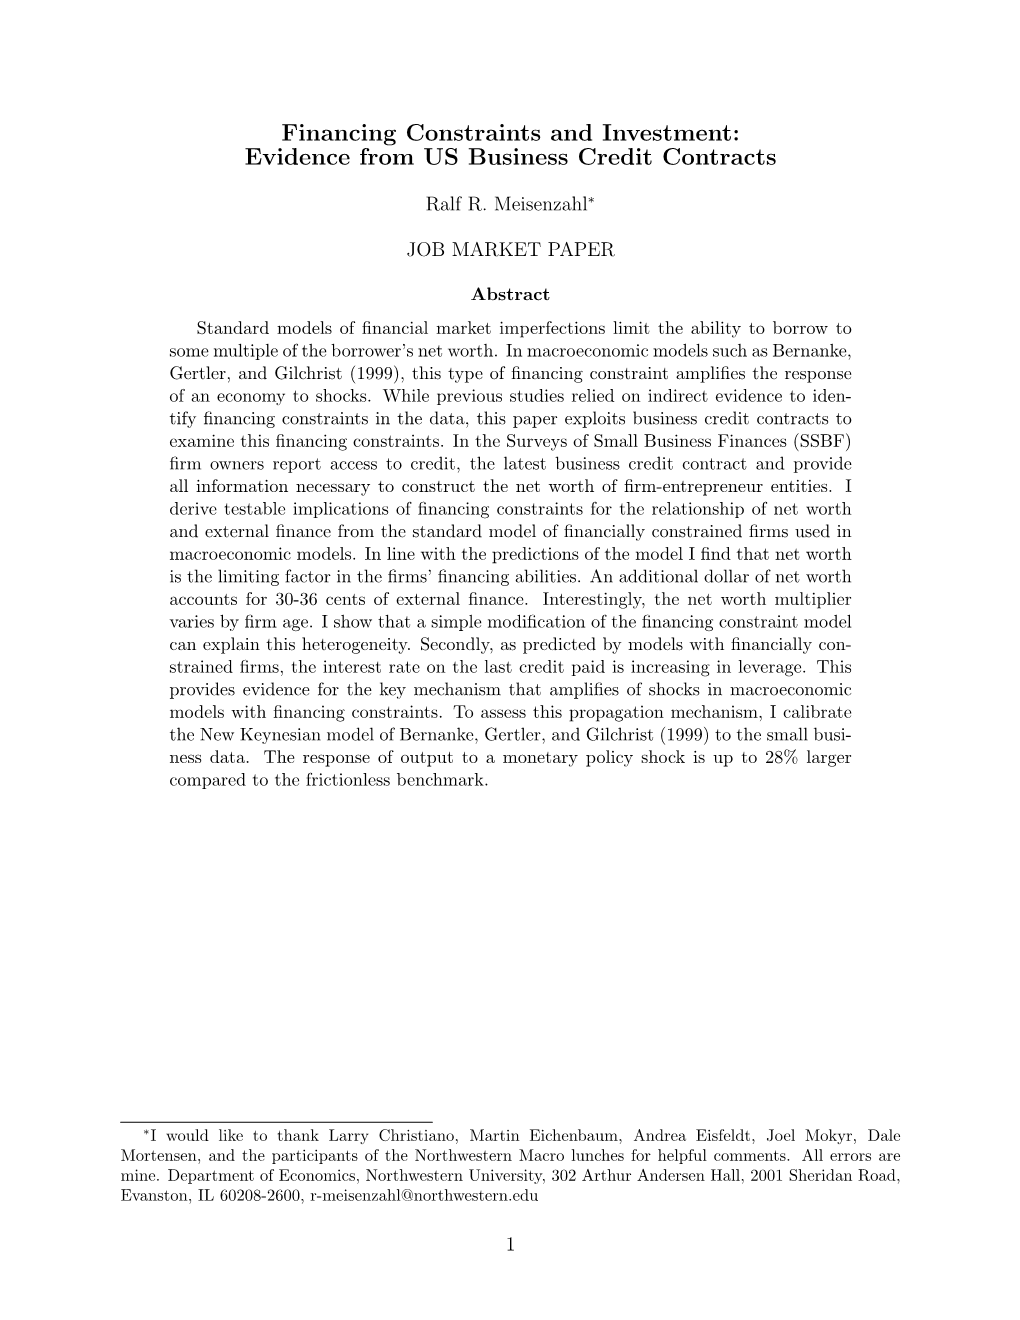 Financing Constraints and Investment: Evidence from US Business Credit Contracts